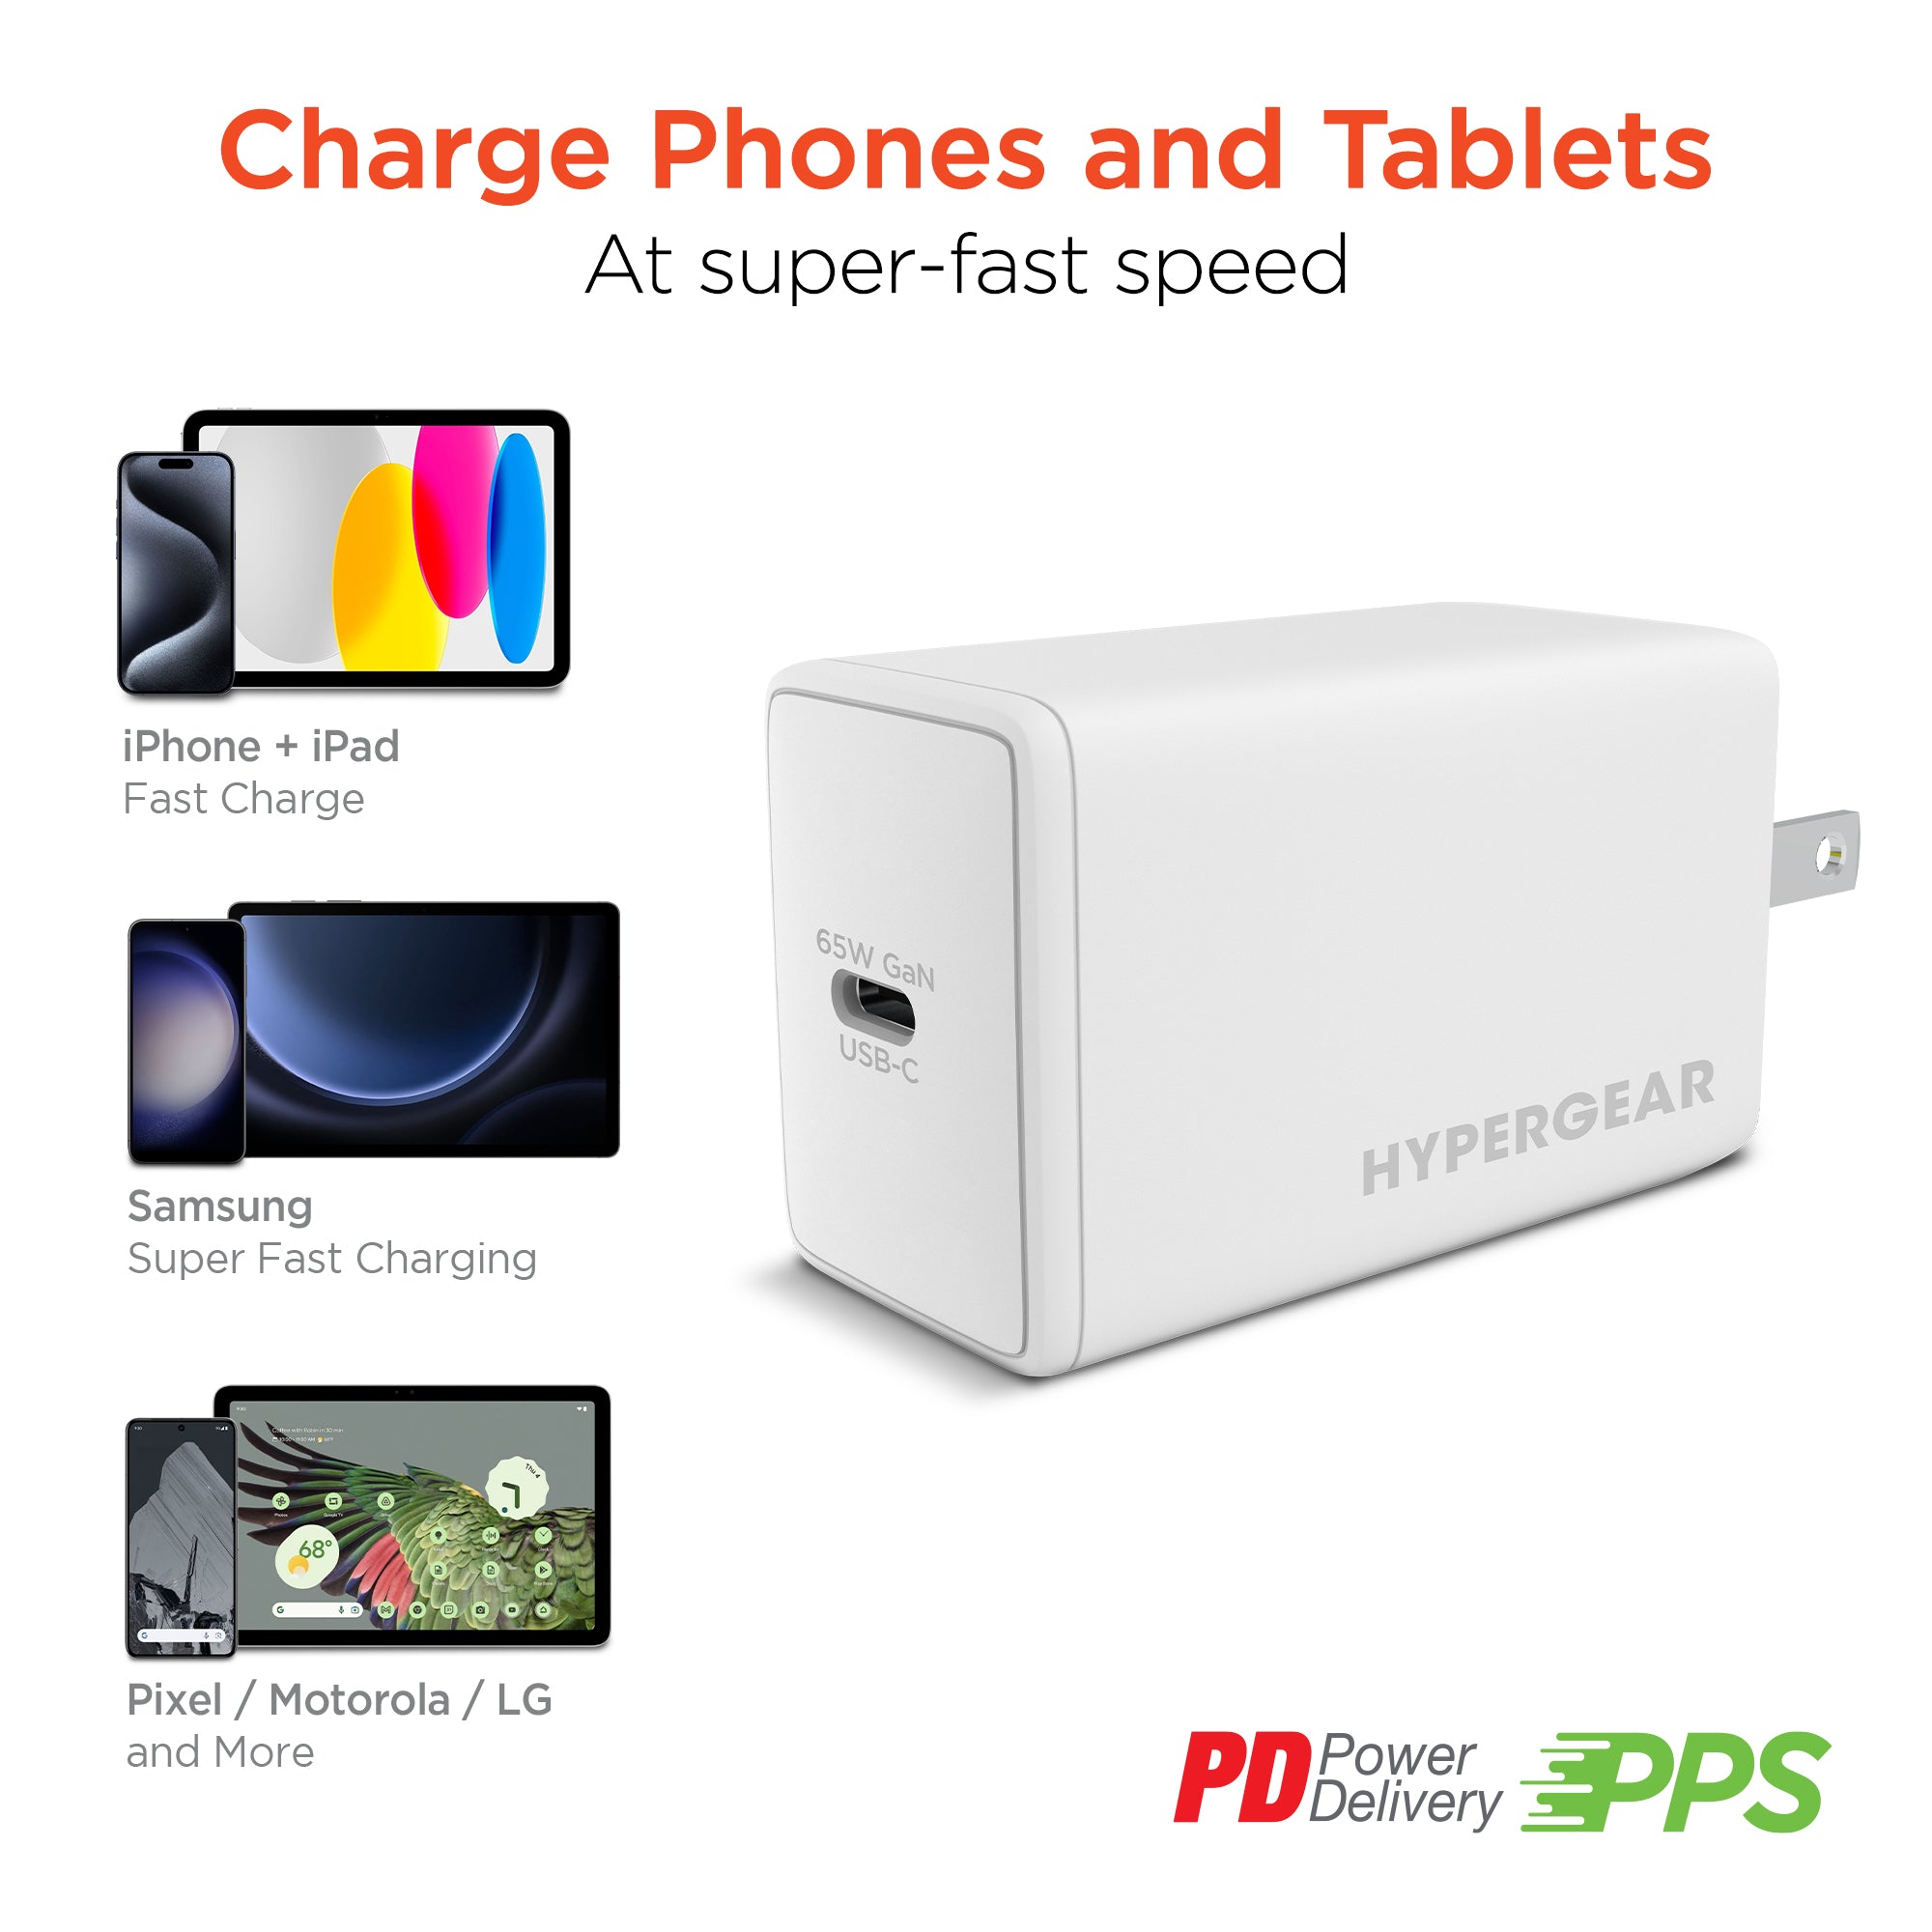 SpeedBoost 65W USB-C PD GaN Laptop Wall Charger with PPS